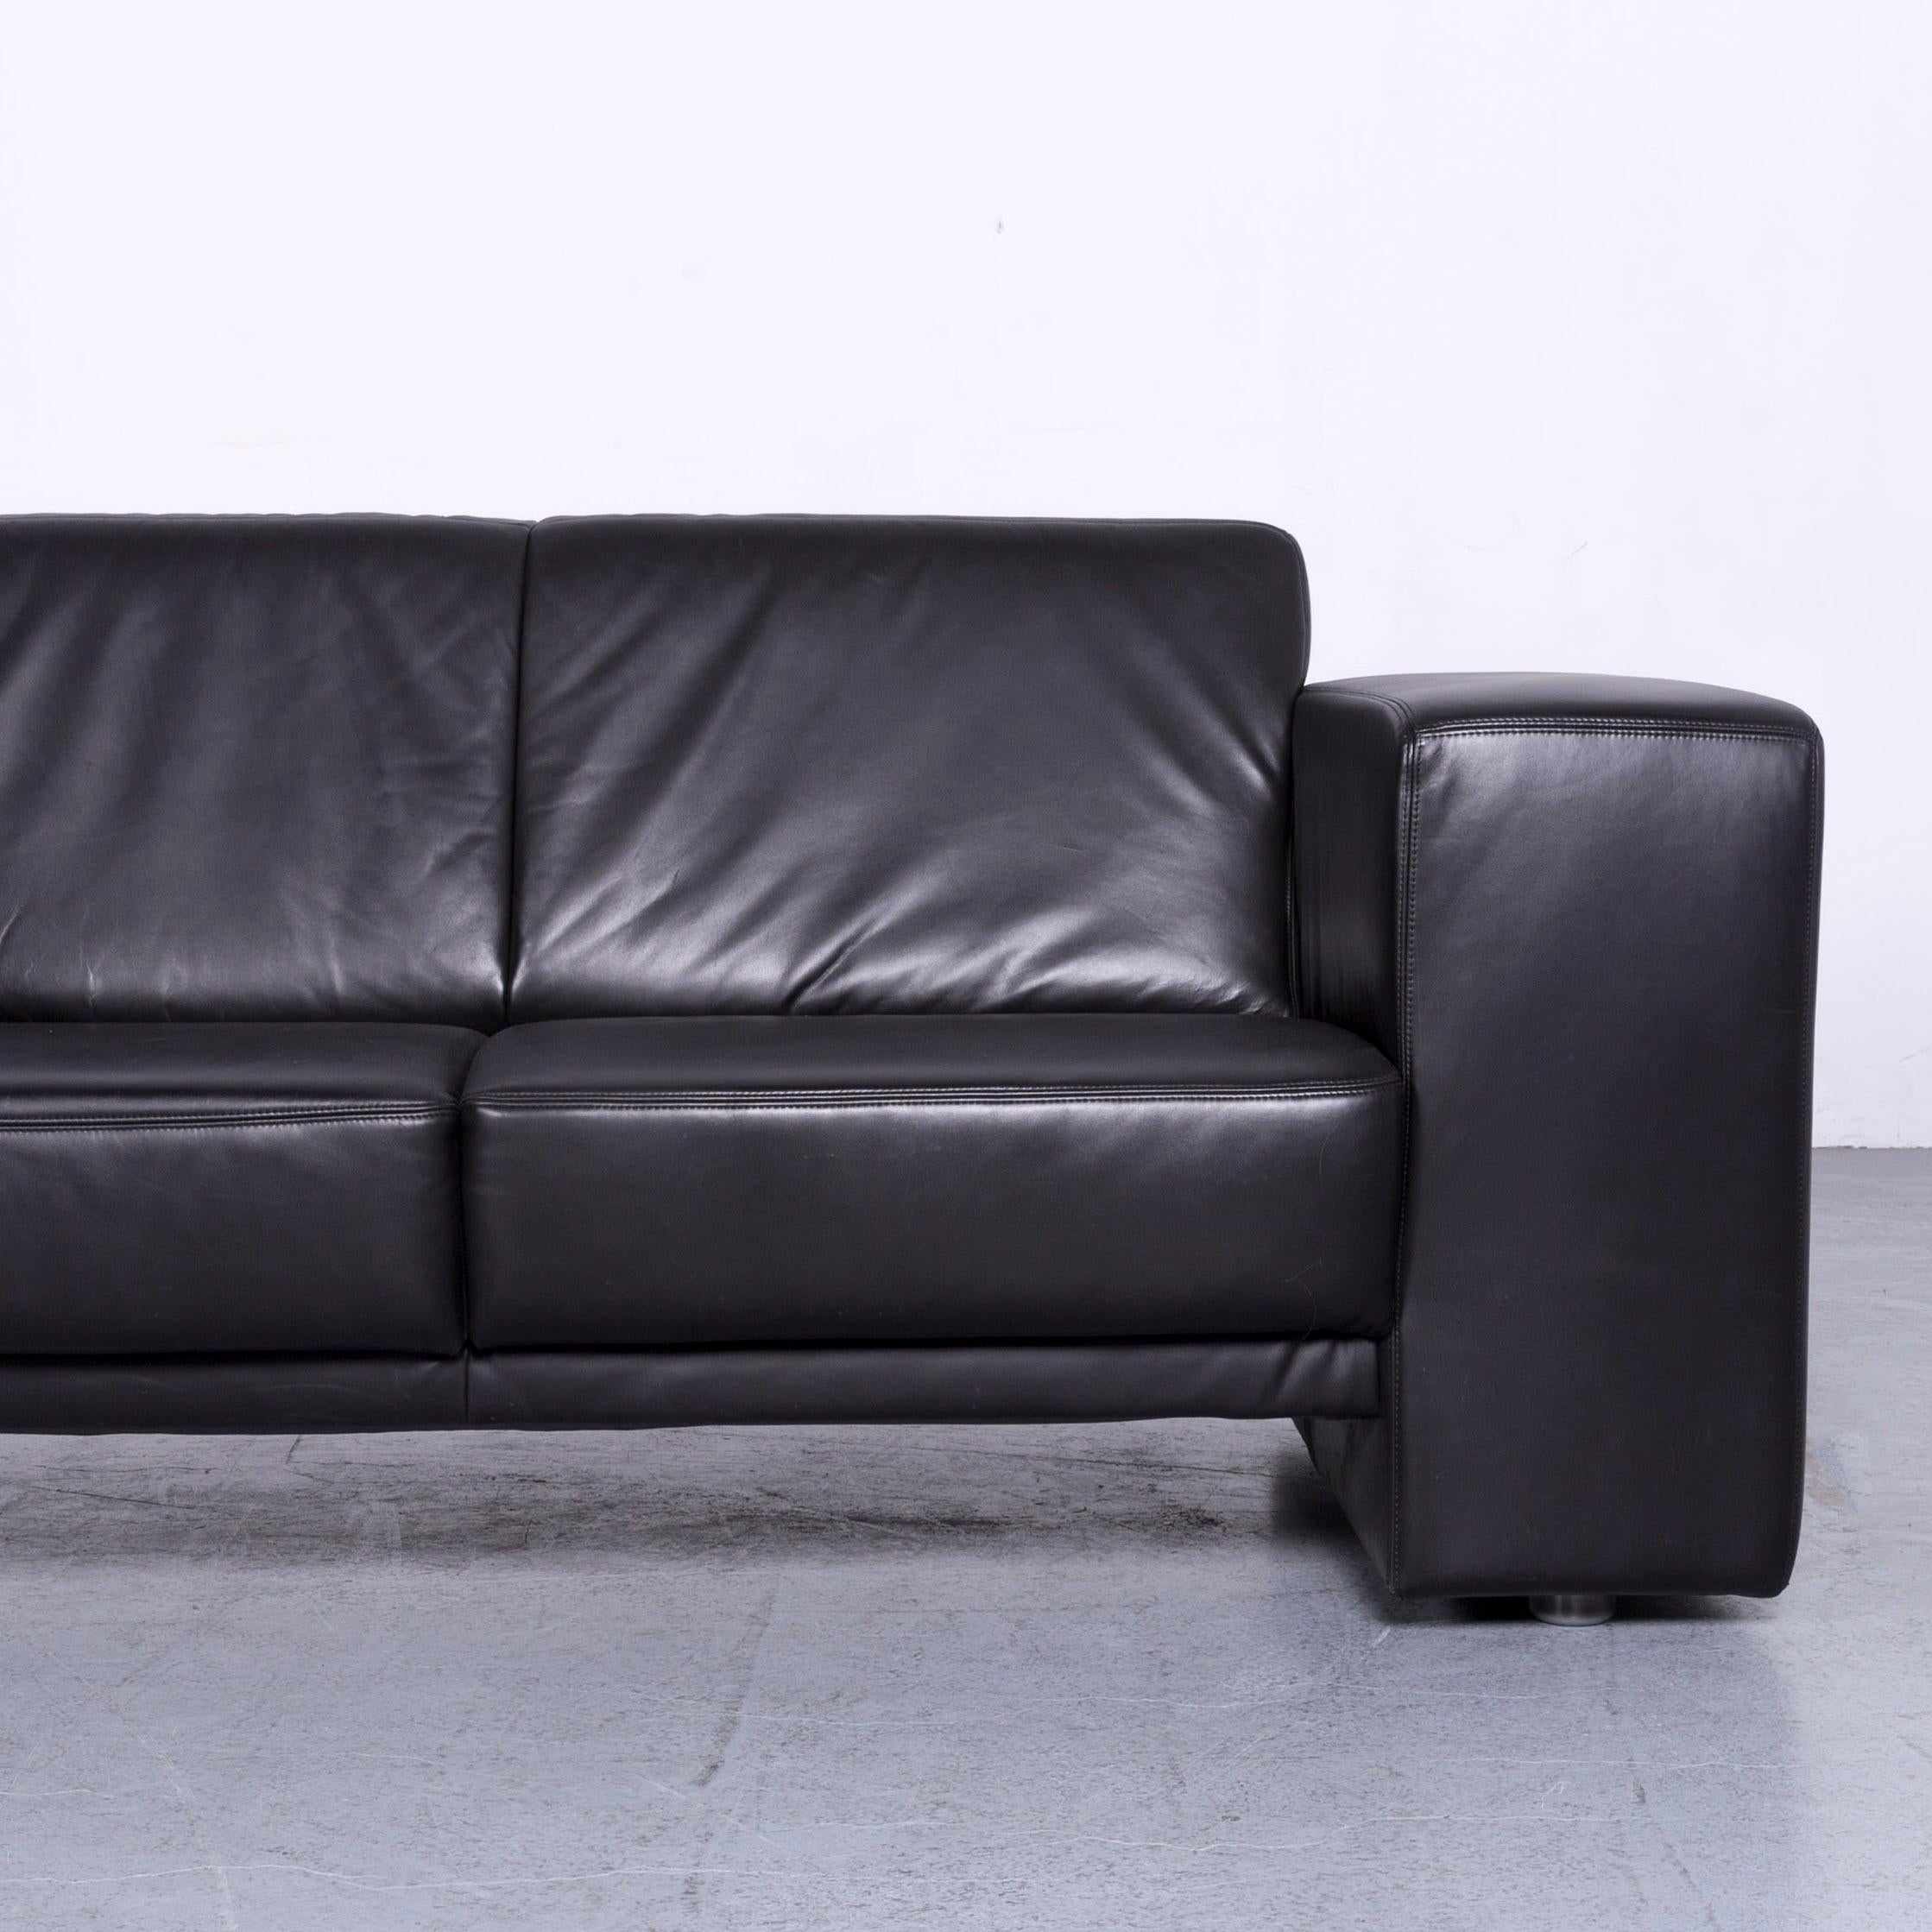 Contemporary Koinor Designer Leather Sofa Black Two-Seat Couch